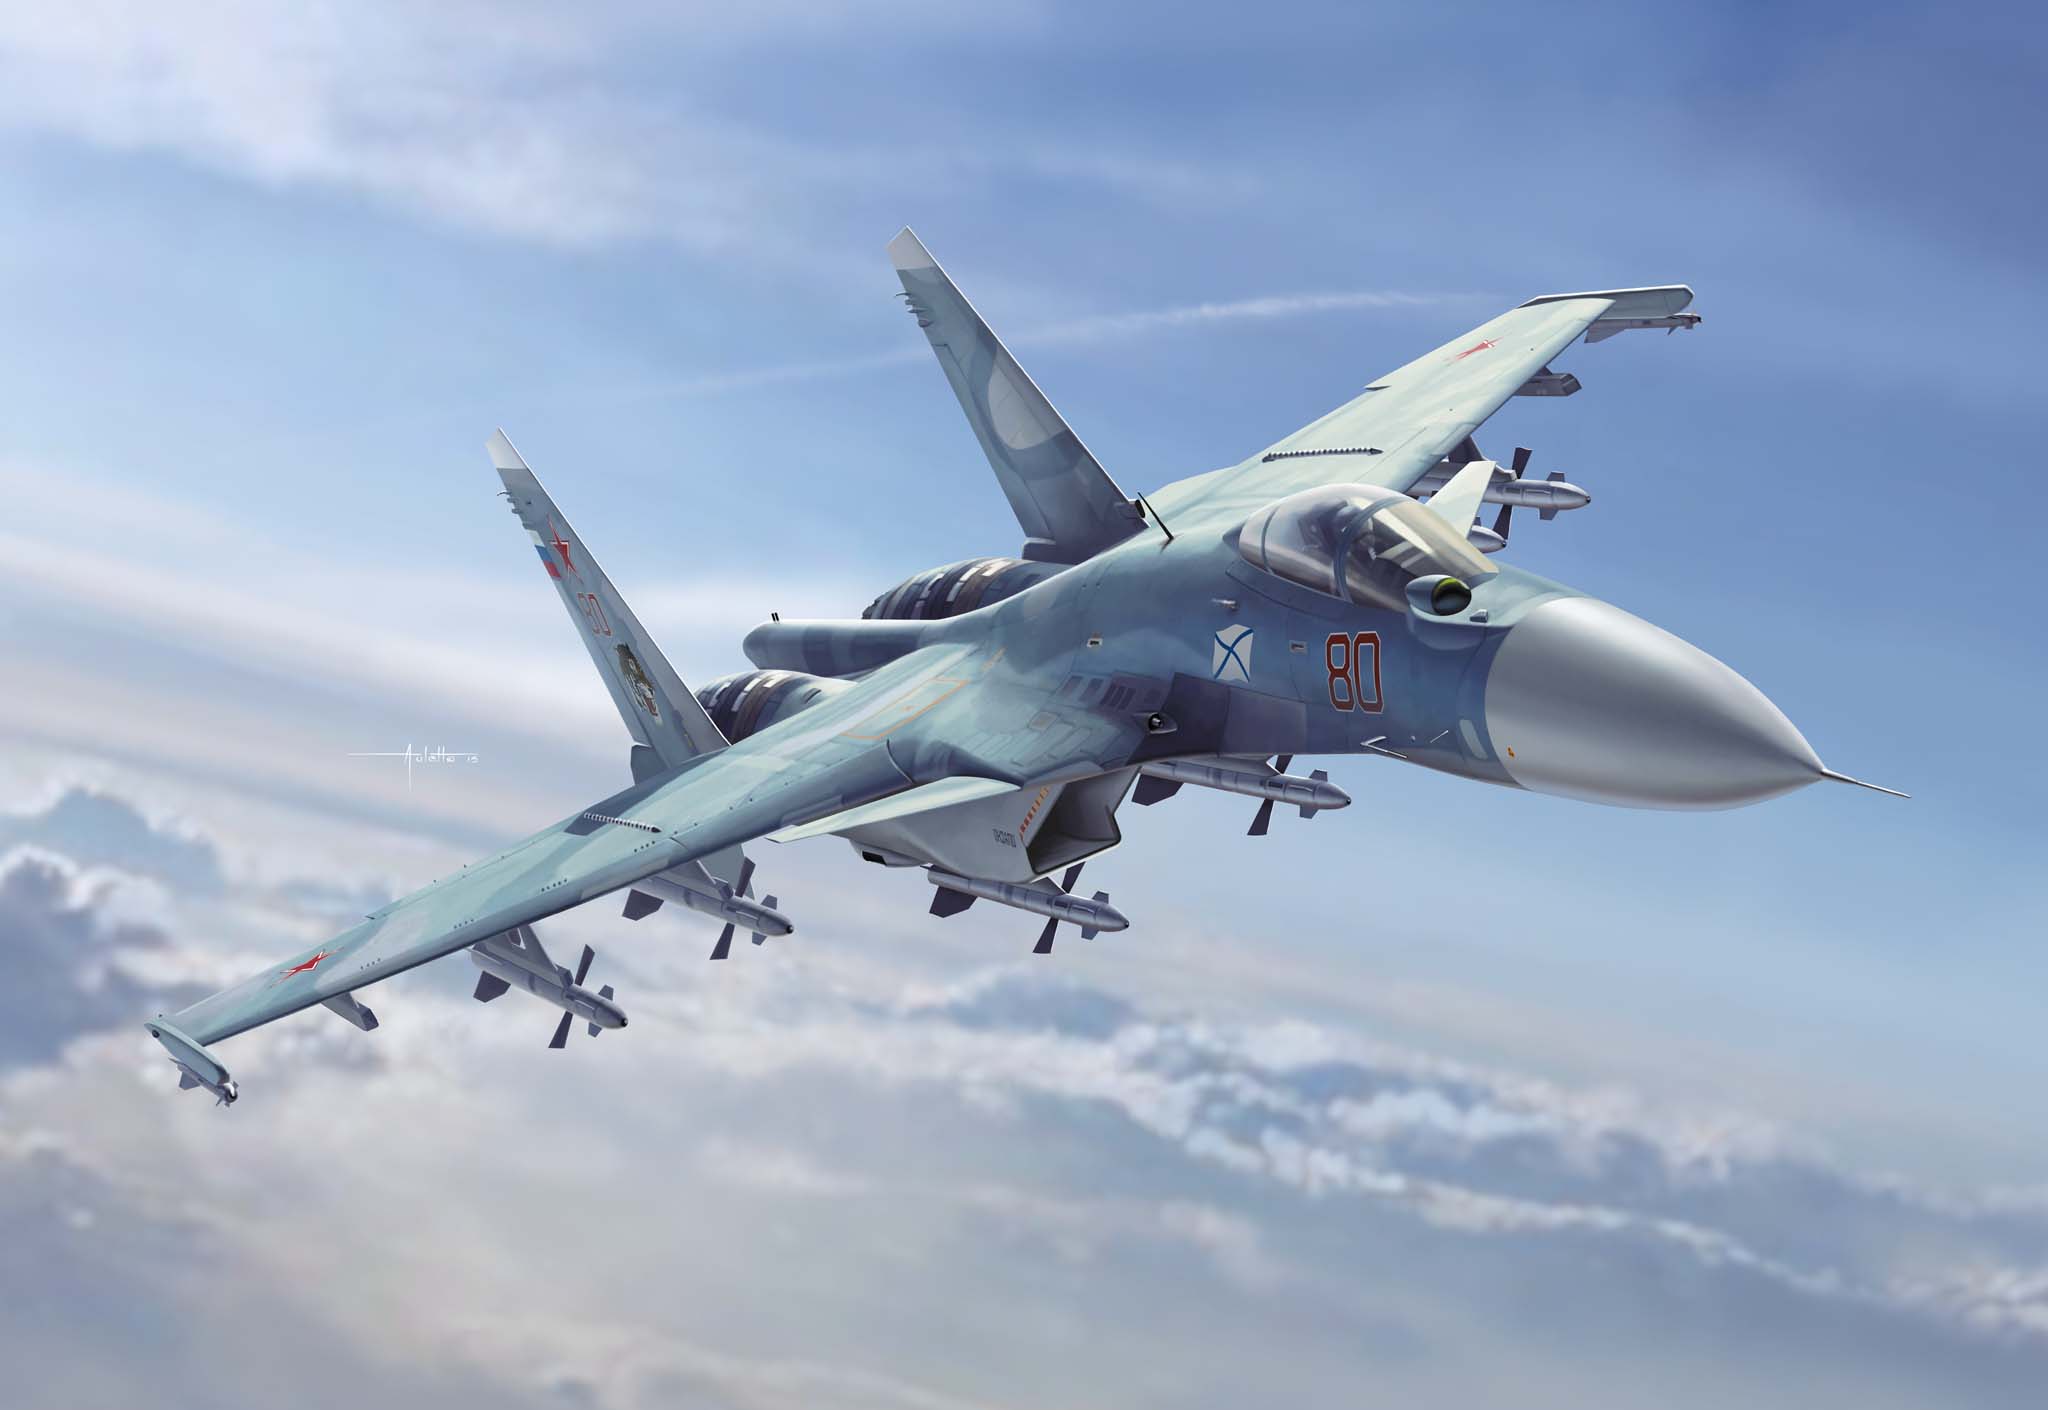 General 2048x1410 aircraft sky flying military military vehicle clouds missiles signature pilot men artwork Vincenzo Auletta Sukhoi Su-33 Flanker-D Russian Navy jet fighter Boxart Sukhoi